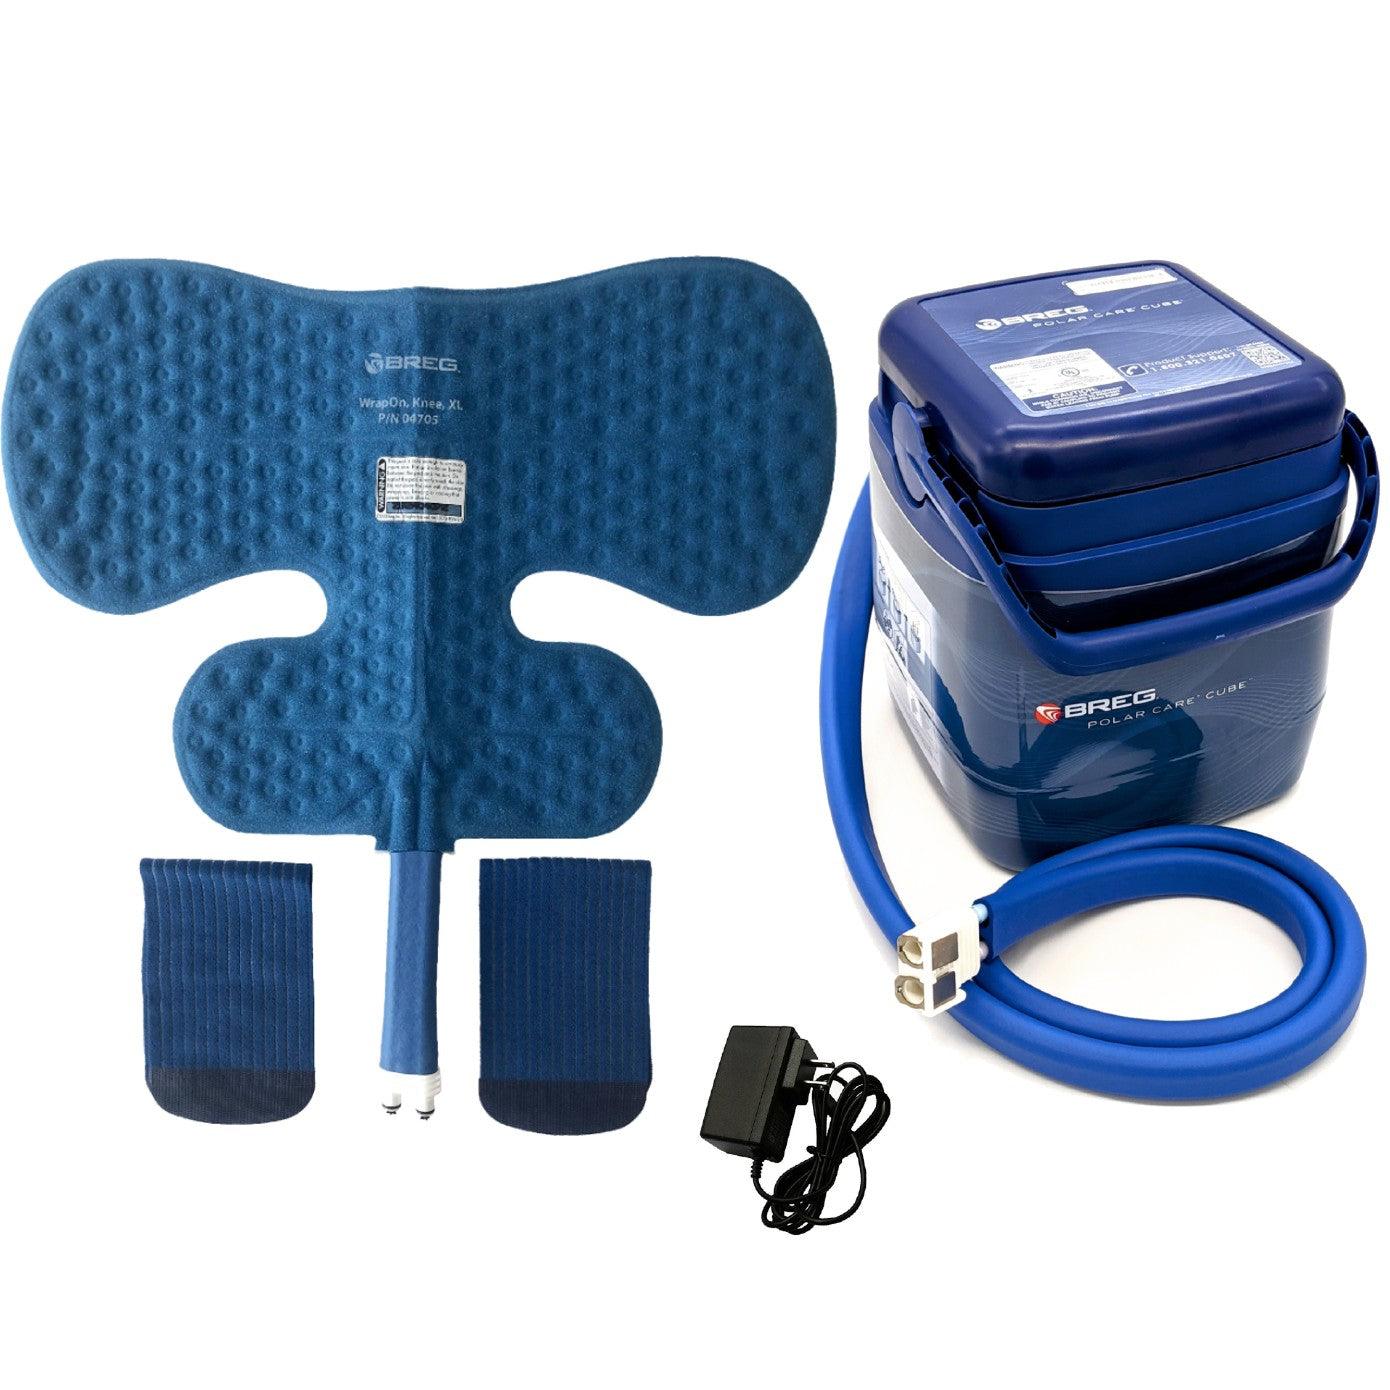 Breg® Polar Care Cube System w/ Wrap-On Pads - 10701-04705 Breg® Polar Care Cube System w/ Wrap-On Pads - undefined by Supply Physical Therapy Breg, Cold Therapy Units, Combos, Cube